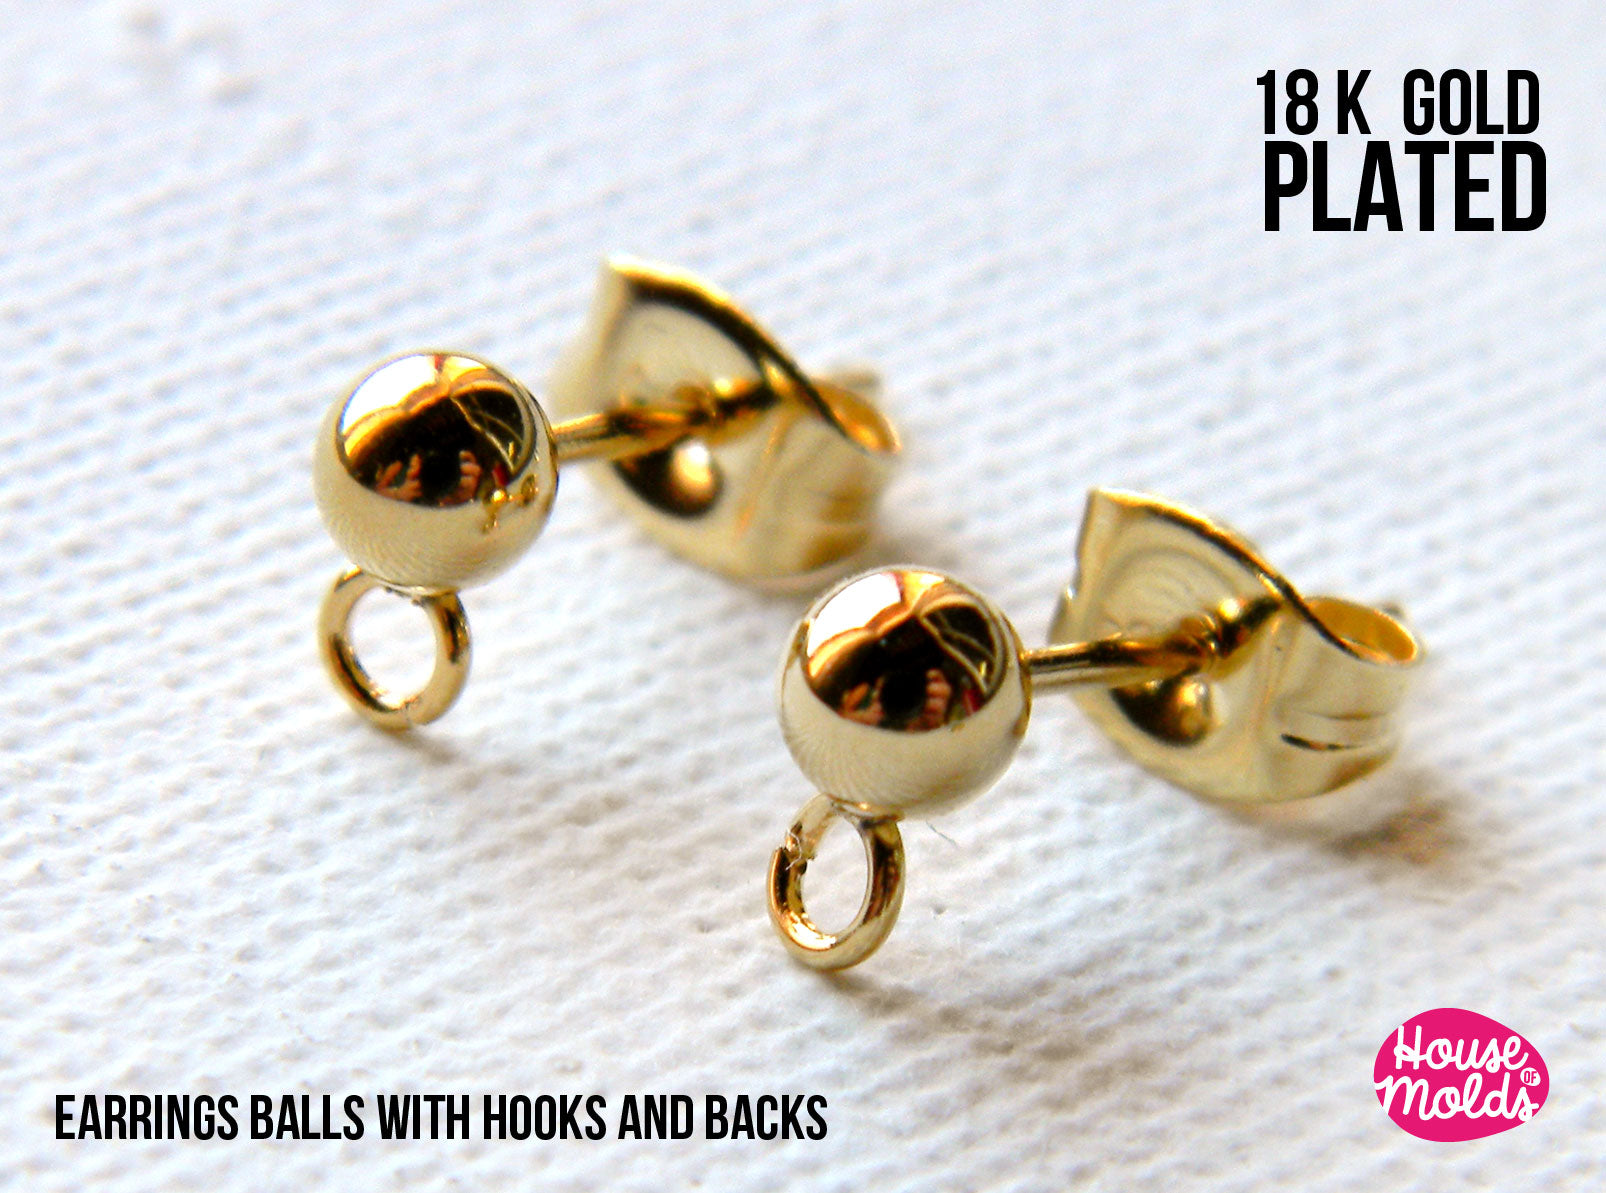 18K Gold Plated Ball Earrings with Hooks - backs included - luxury